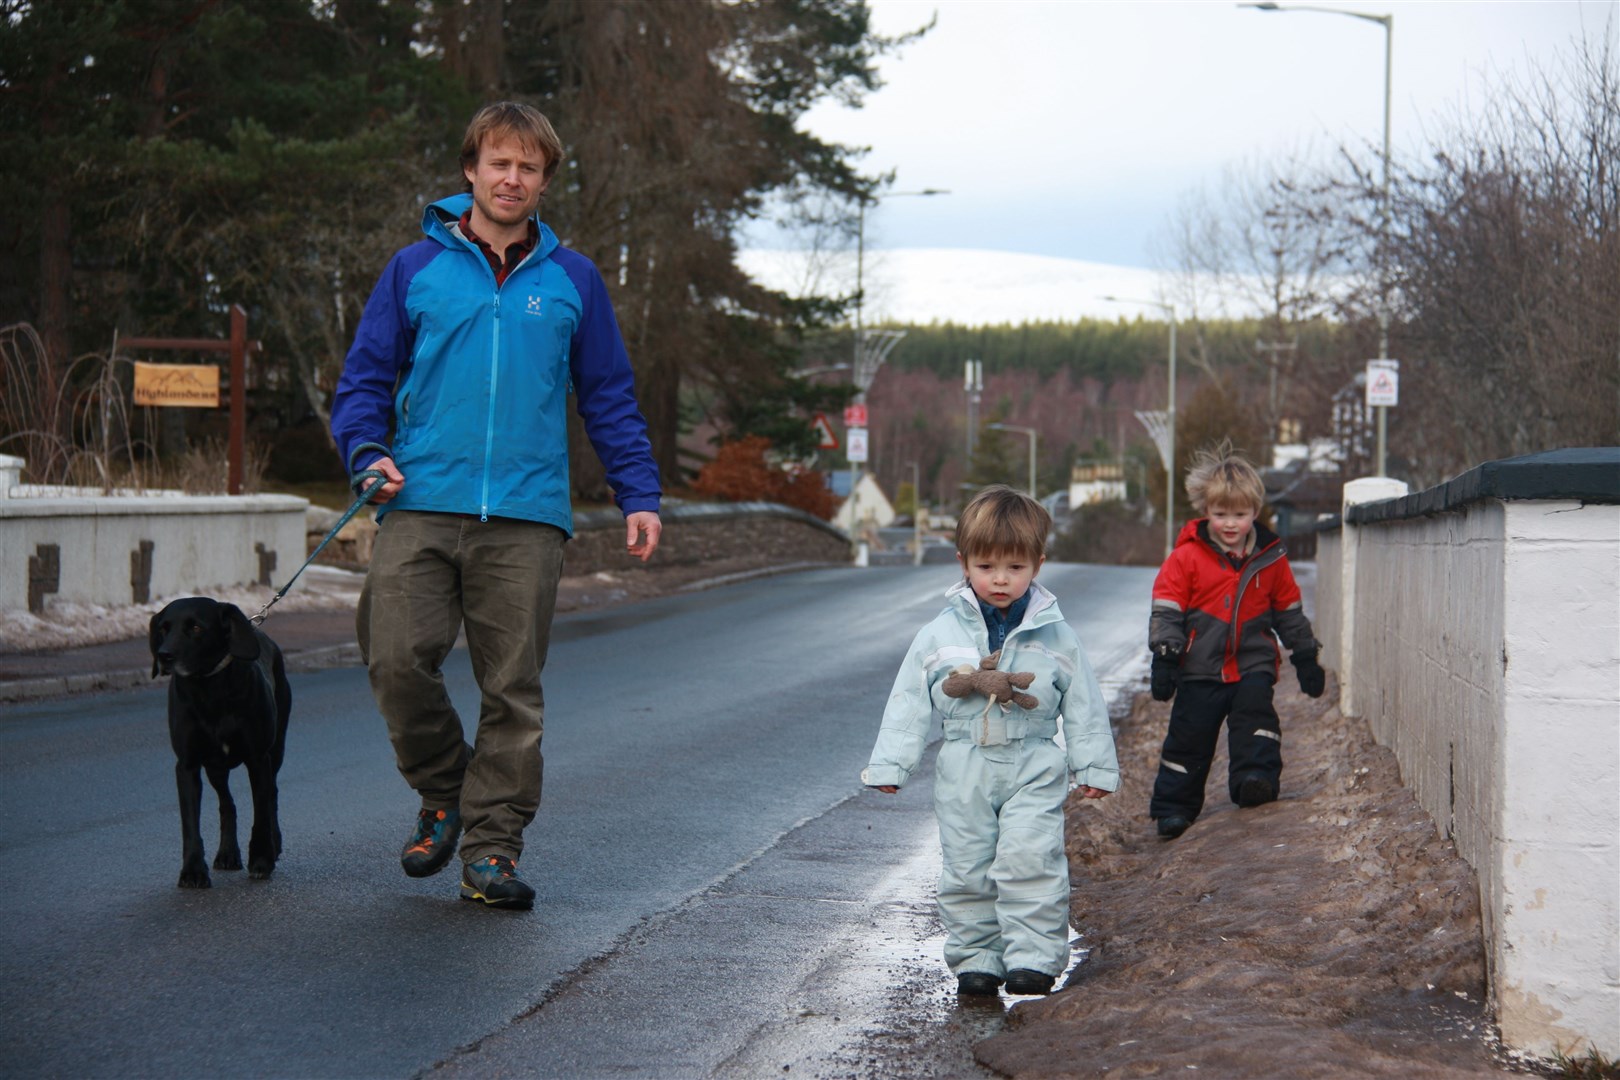 James Bracher with sons Calum (3) and Finn (5), navigating one of the narrow sections of pavement on Main Road in Carrbridge. Photo: Jayne Clark